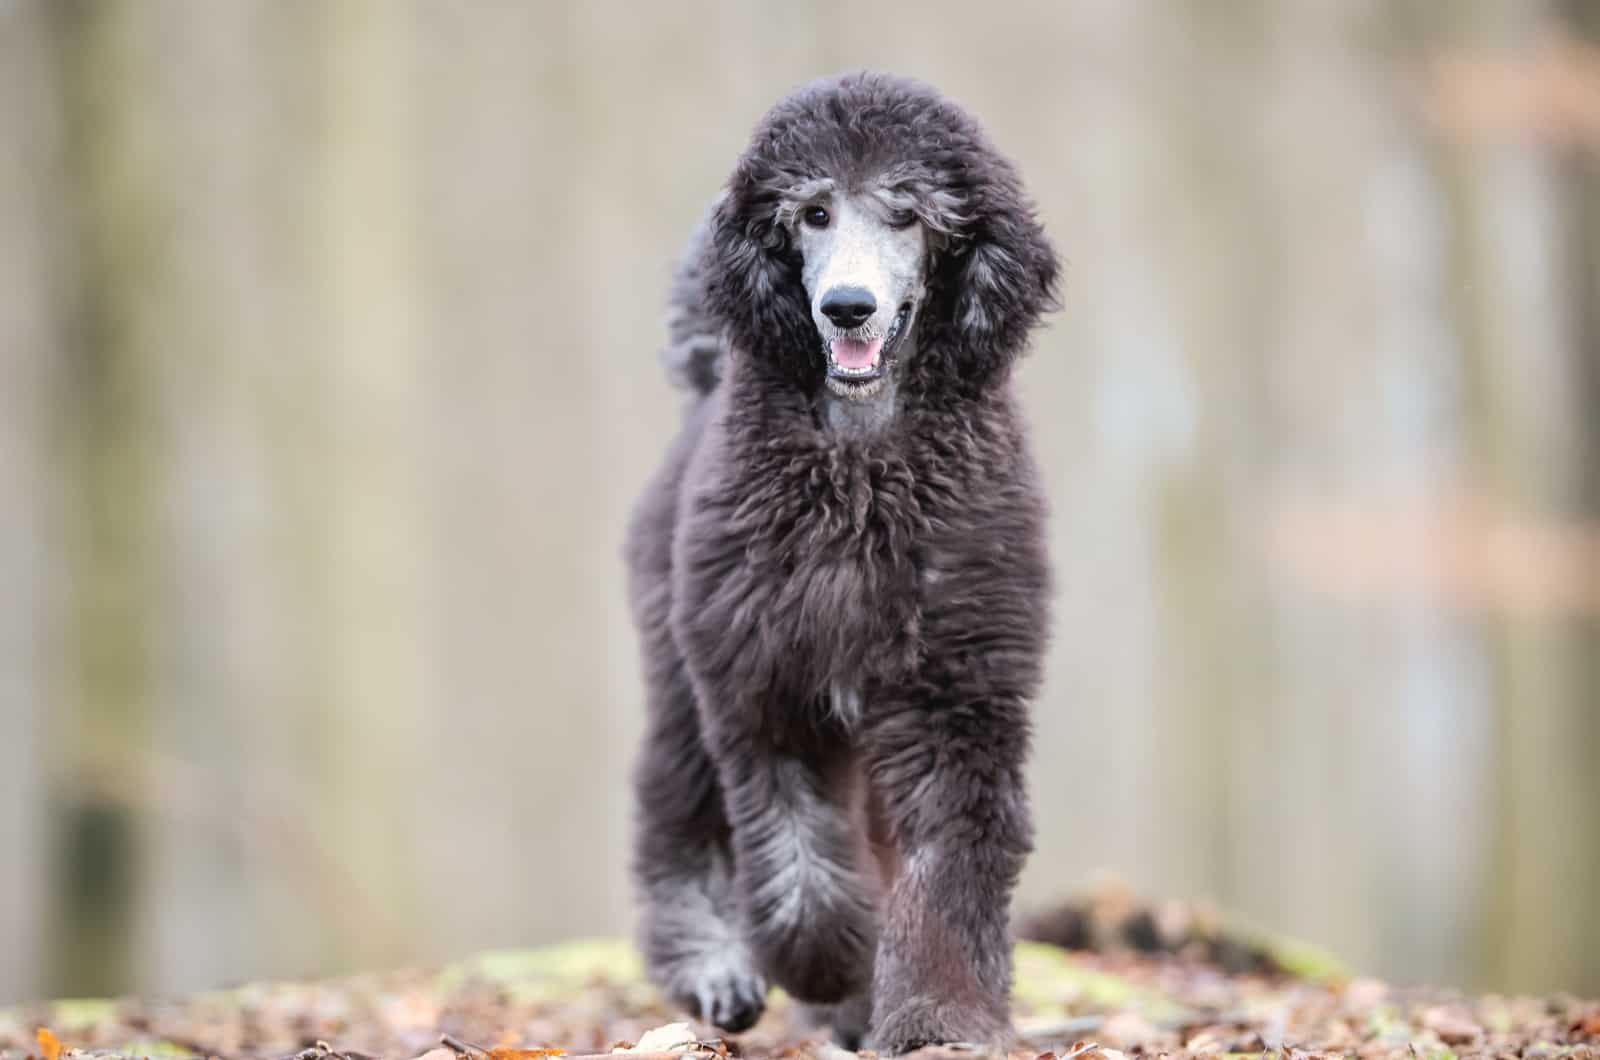 Standard Poodle sets in the woods